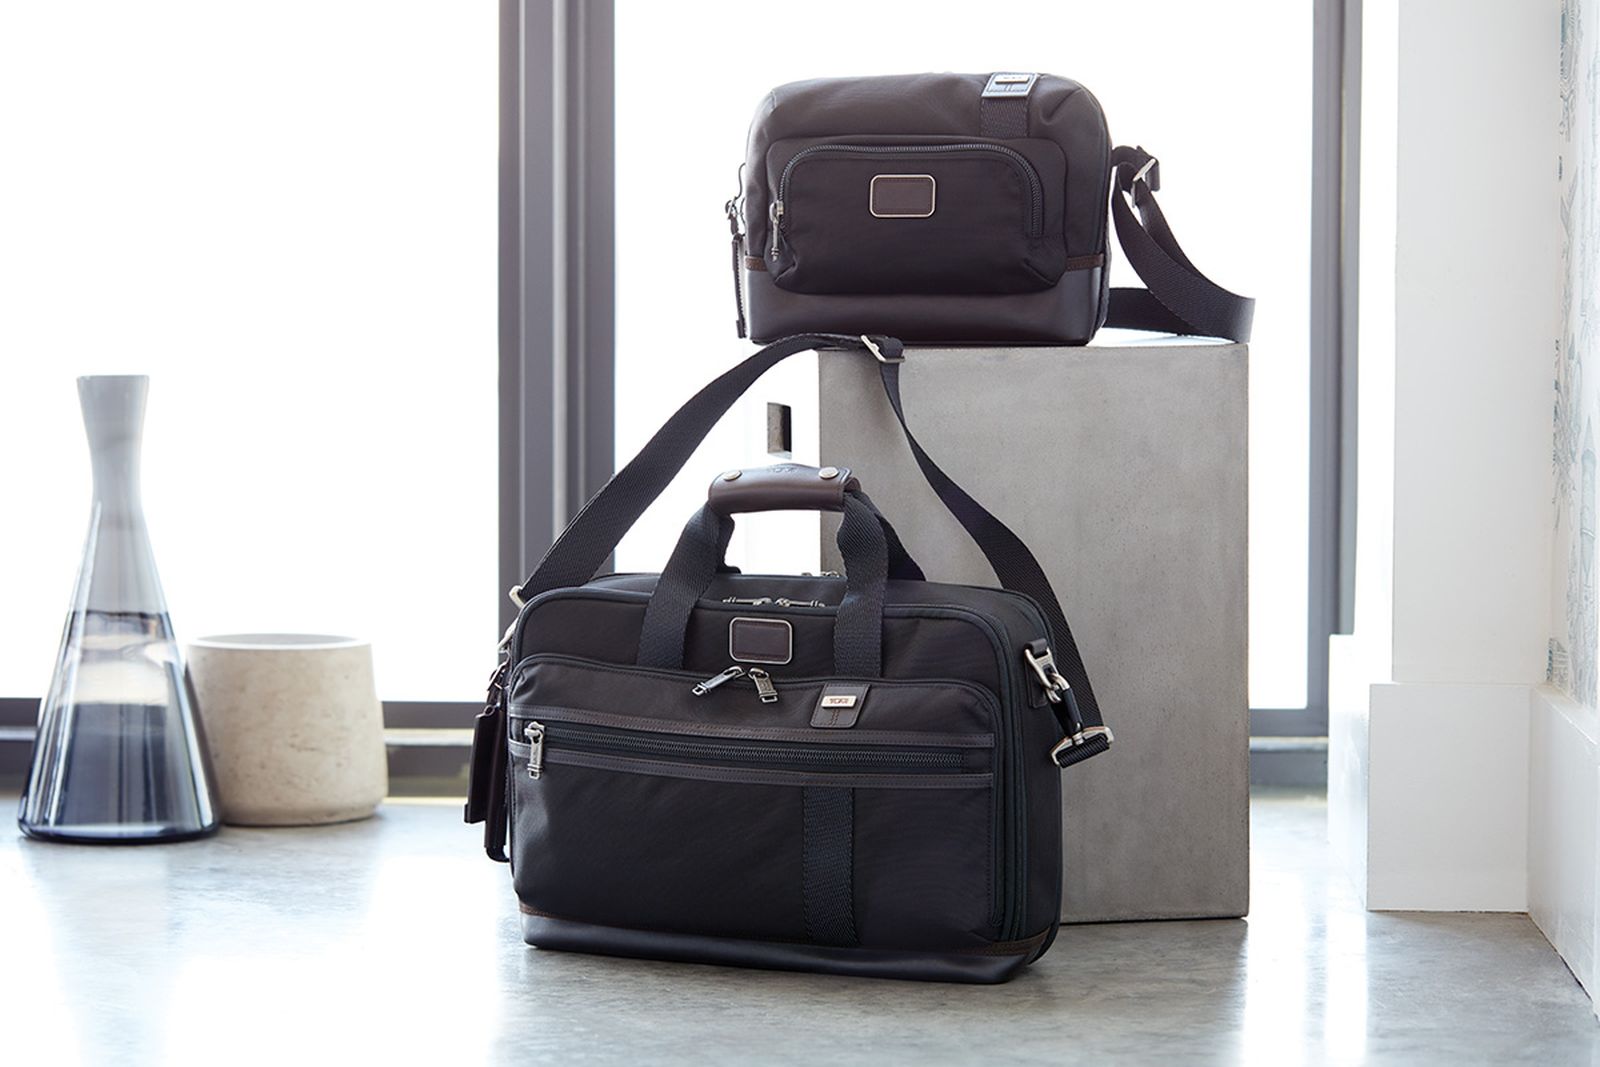 tumi-bags-luggage-collection-03